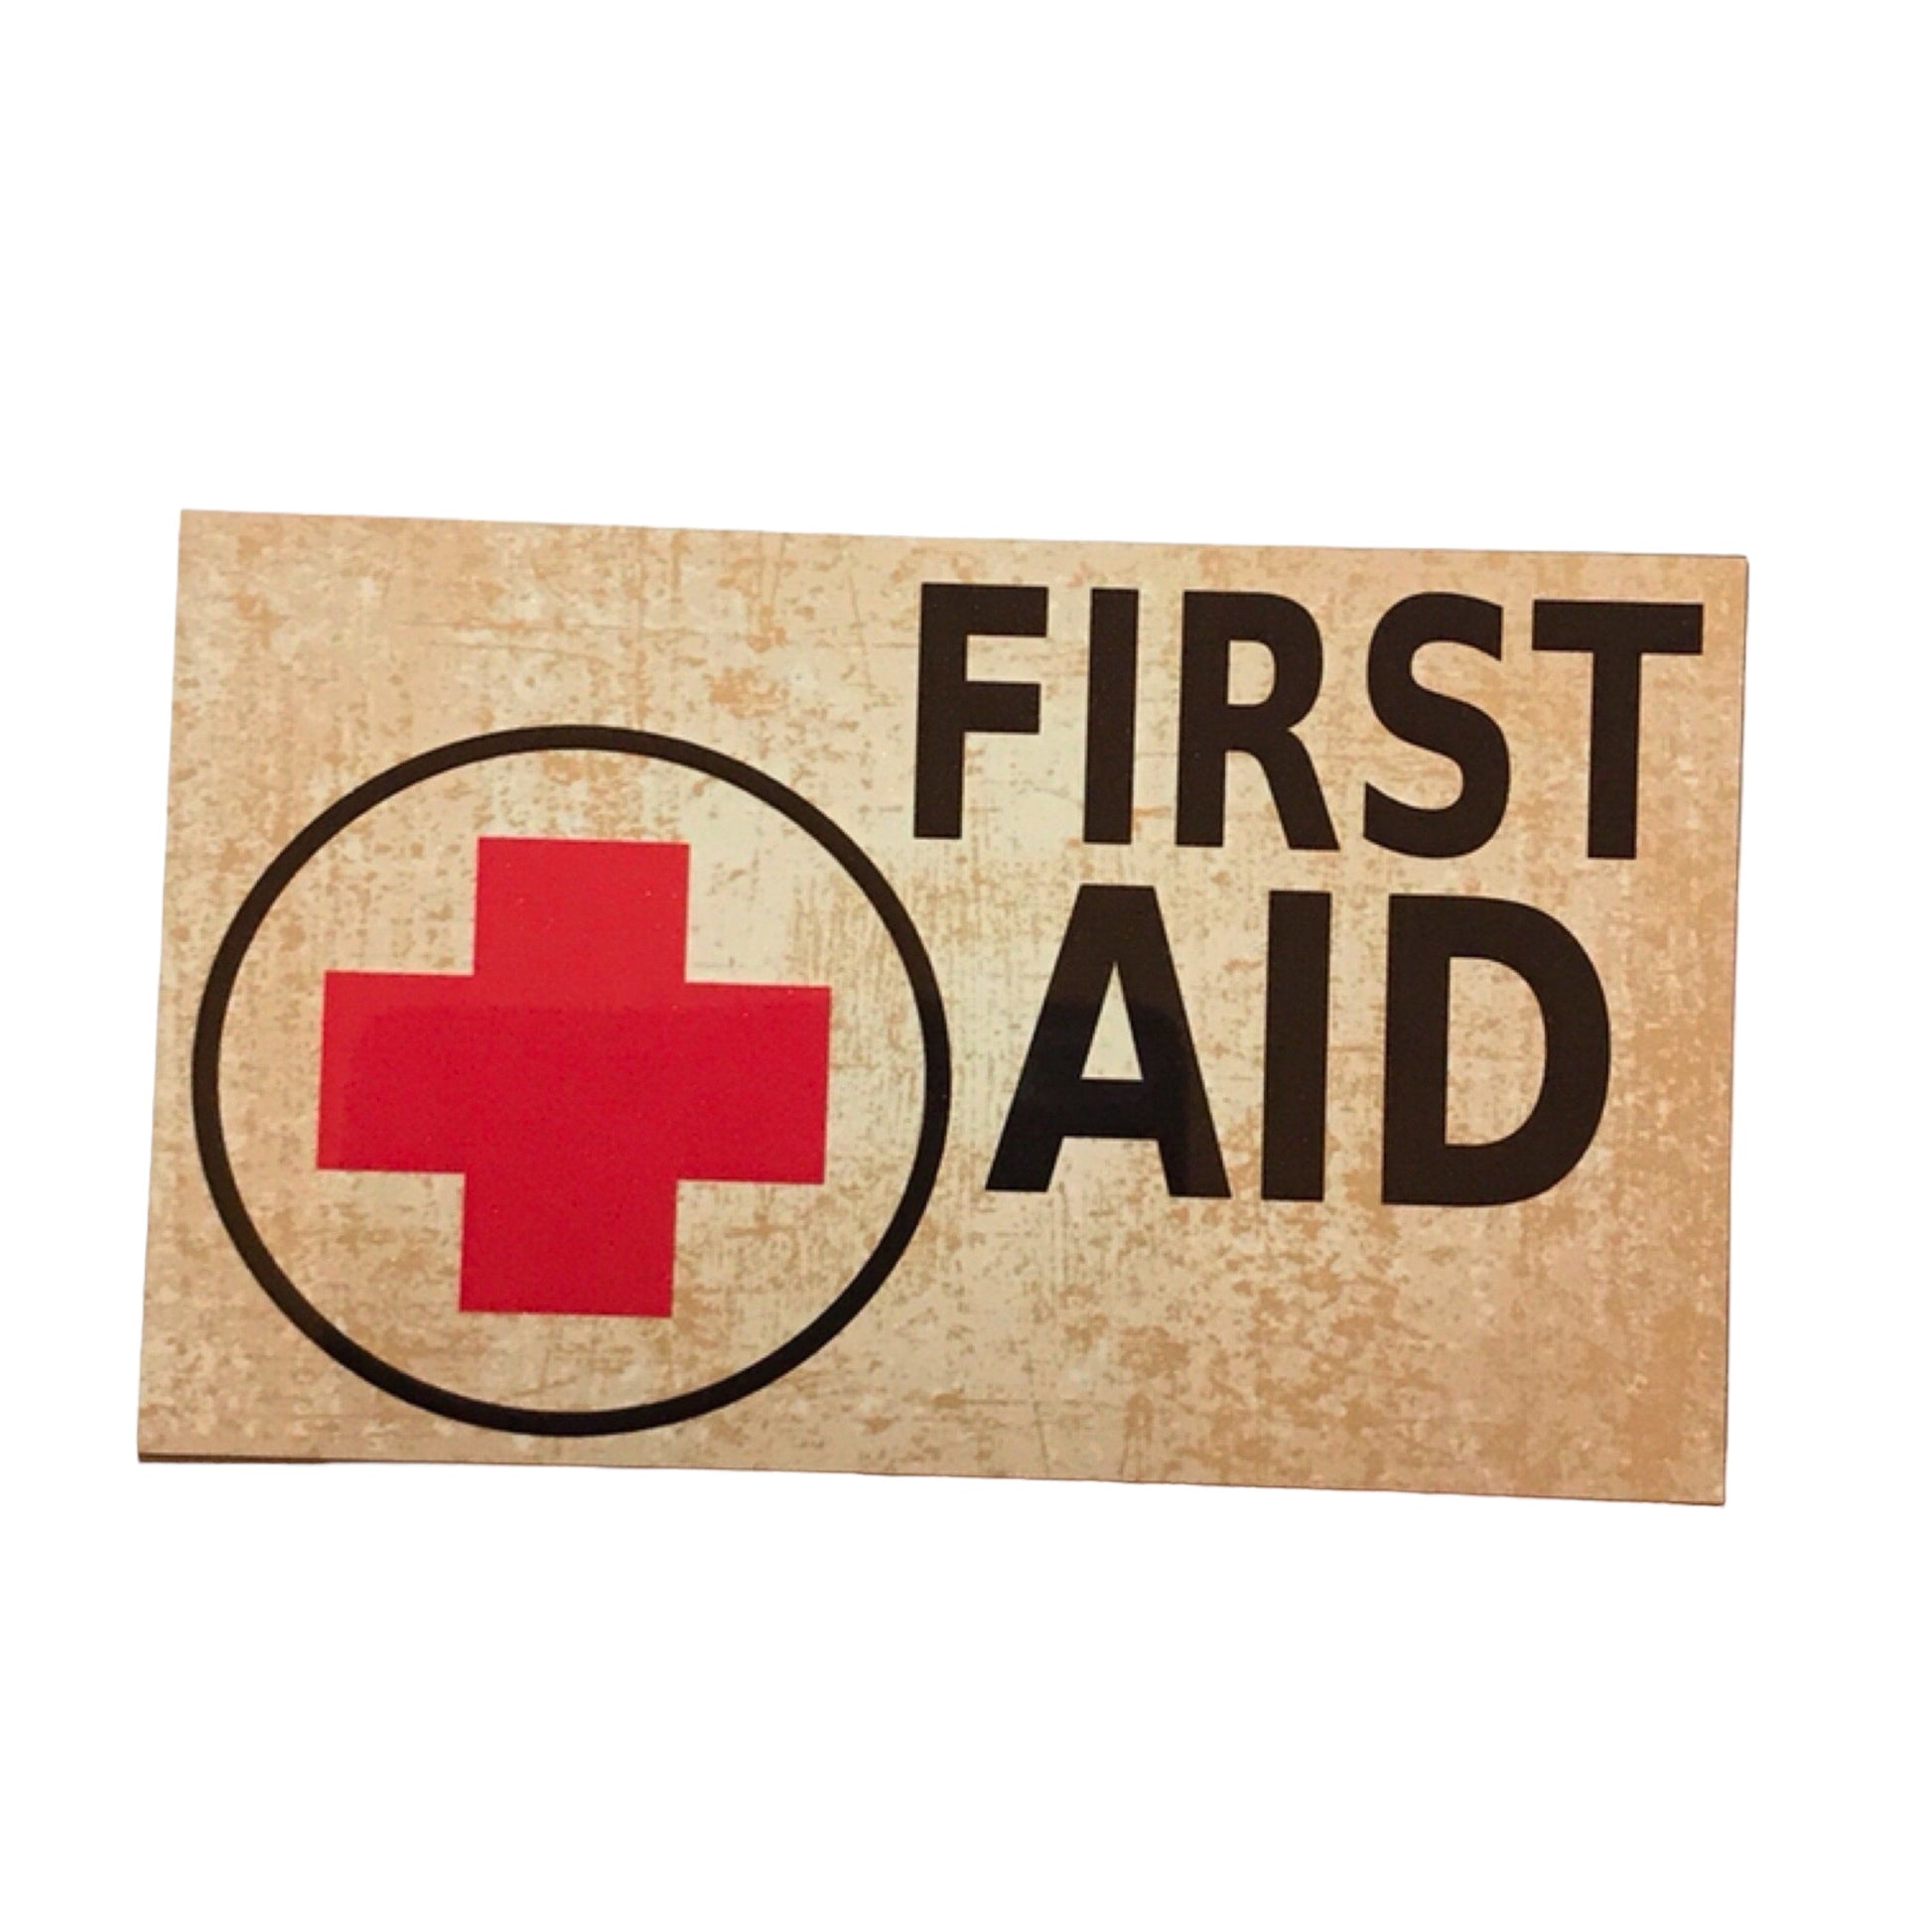 Vintage First Aid Medical Sign - The Renmy Store Homewares & Gifts 